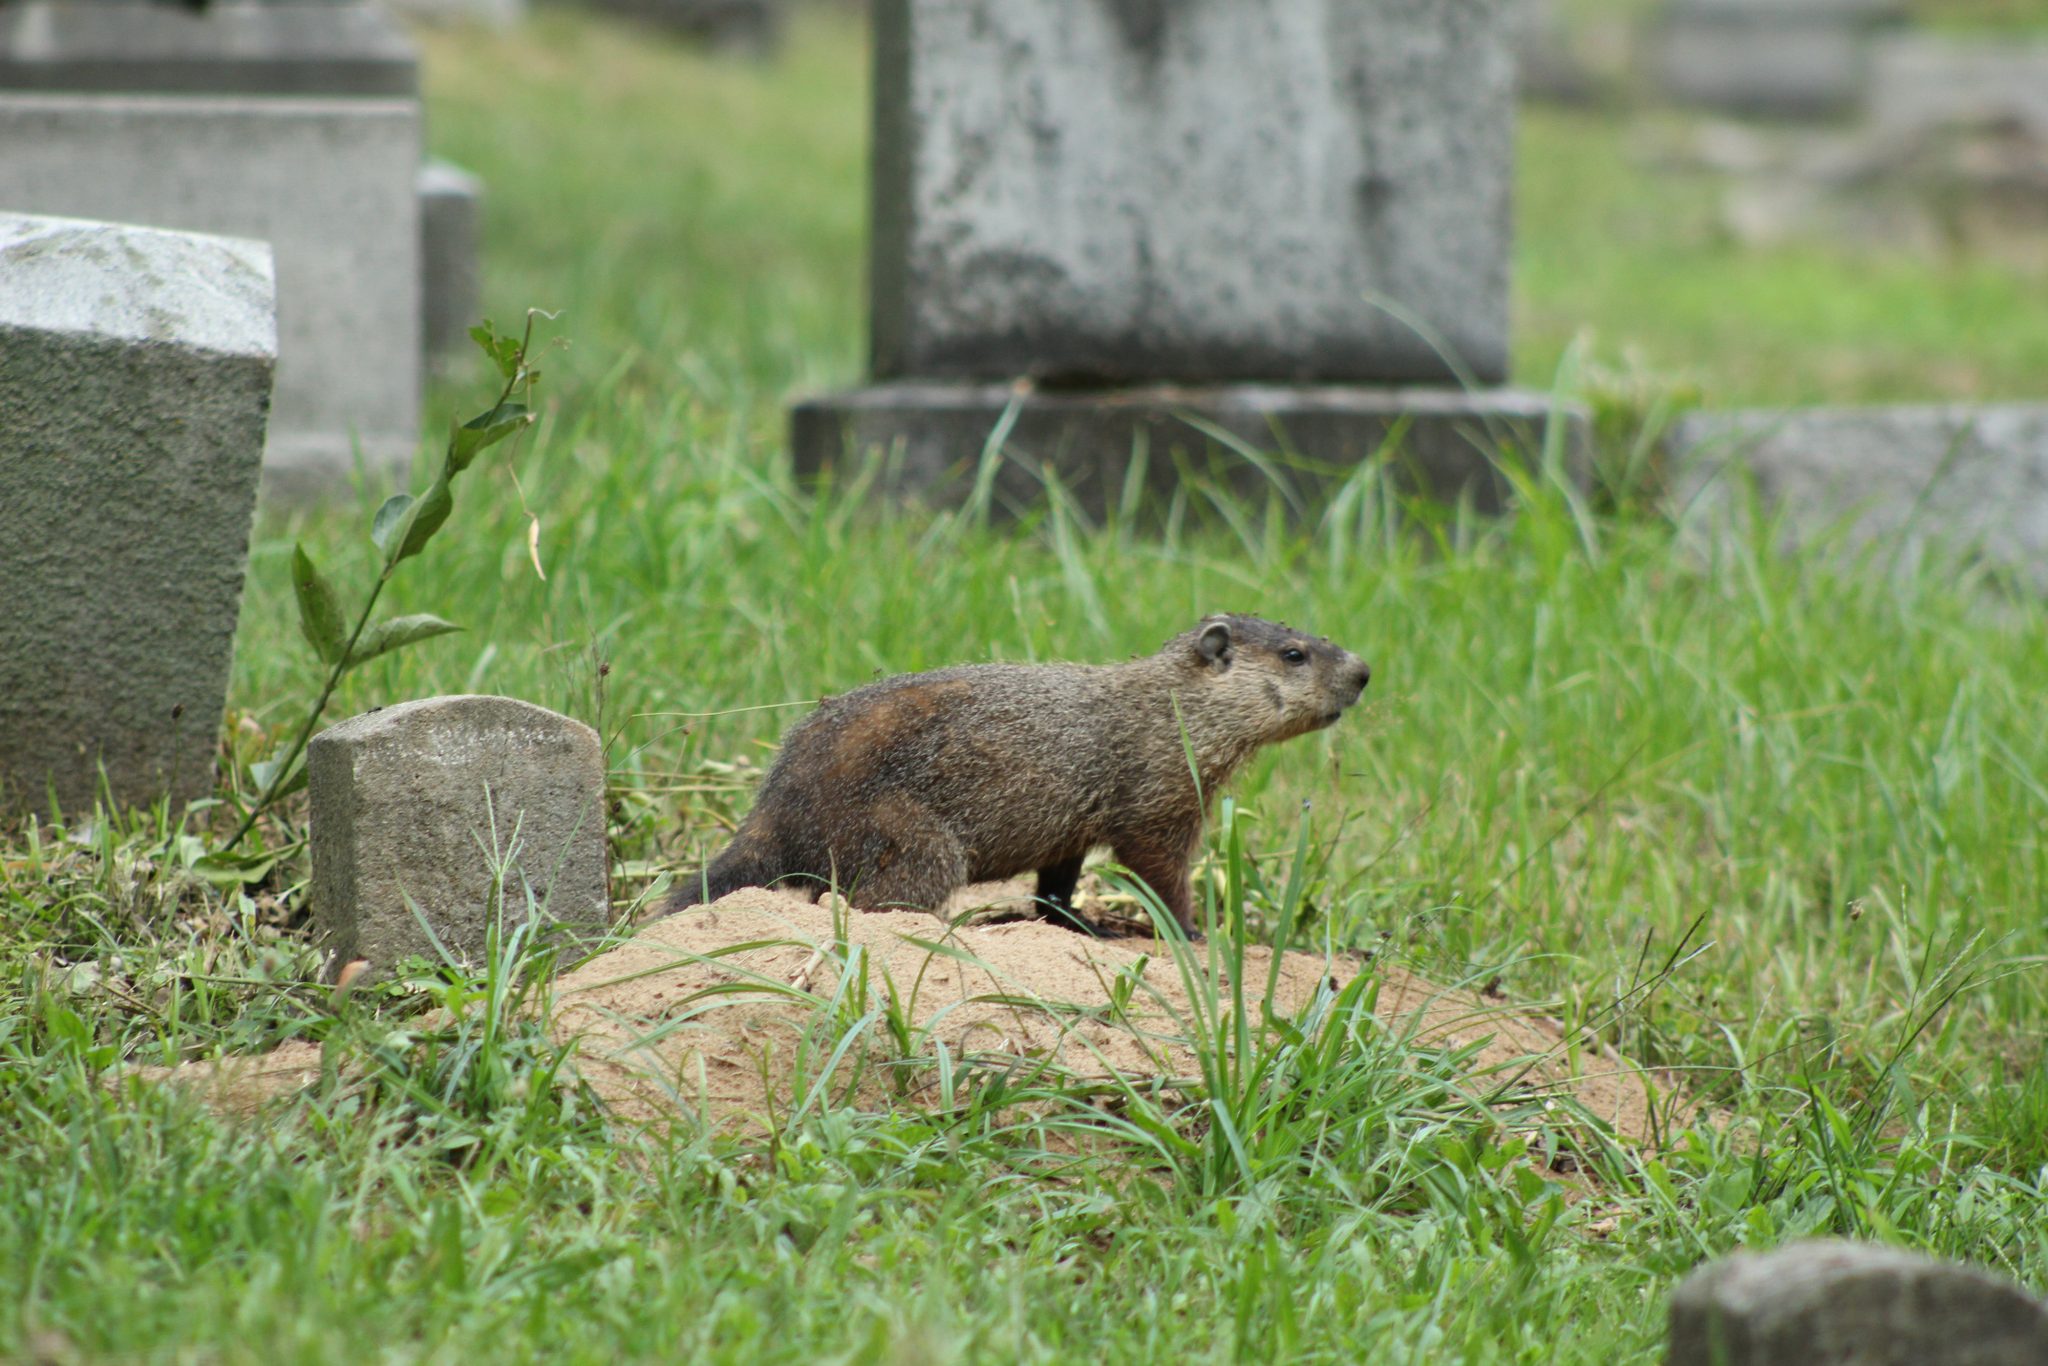 A groundhog sits atop a grave at Mt. Hope Cemetery in Rochester, New York. Tags: groundhog, woodchuck, cemetery, grave, graveyard, Mt. Hope Cemetery, Rochester, New York.